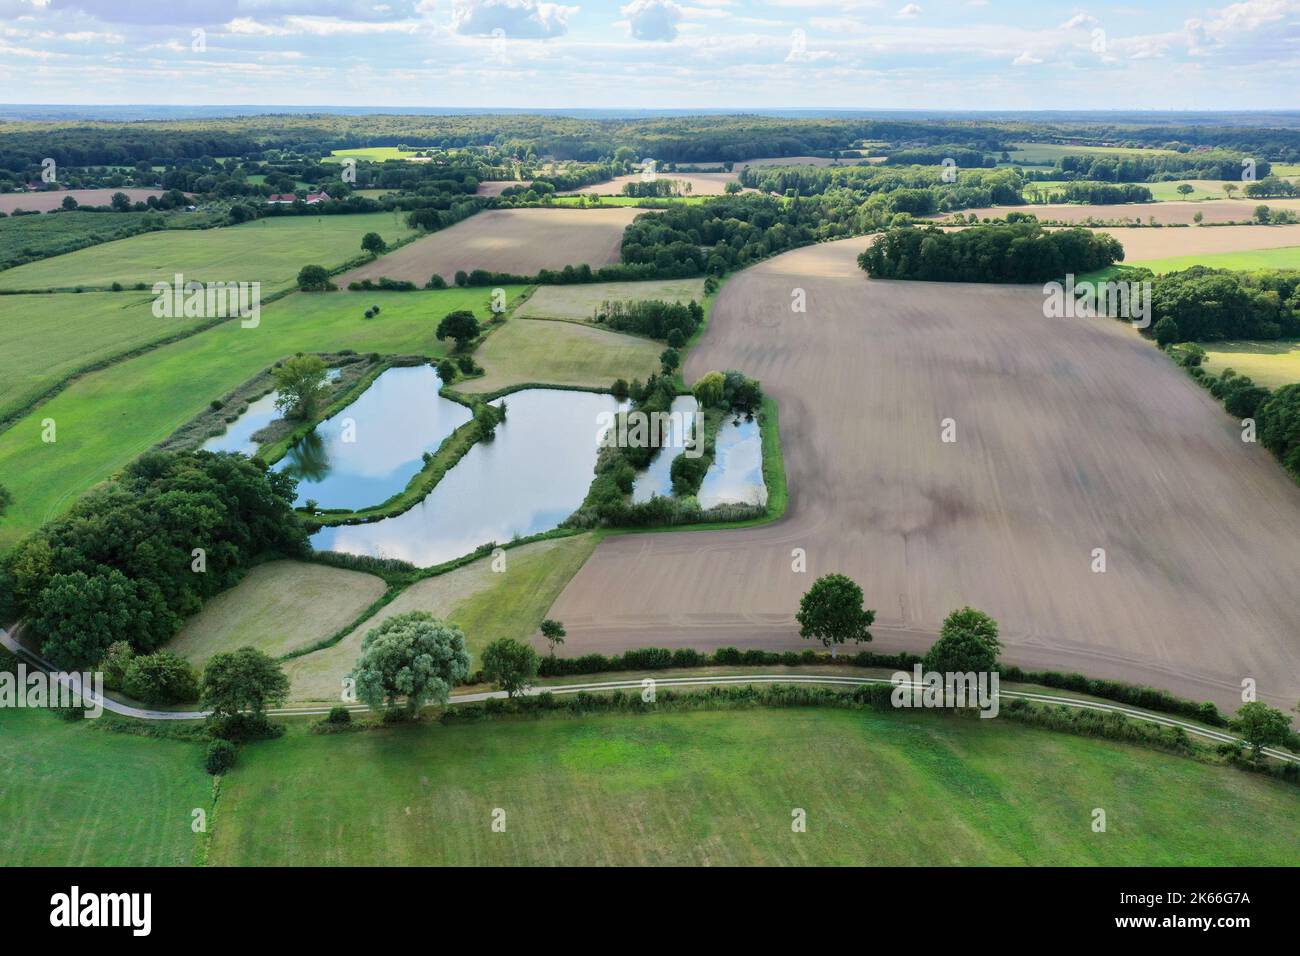 aerial view of fish ponds in field scenery, Germany, Schleswig Holstein, Linau Stock Photo